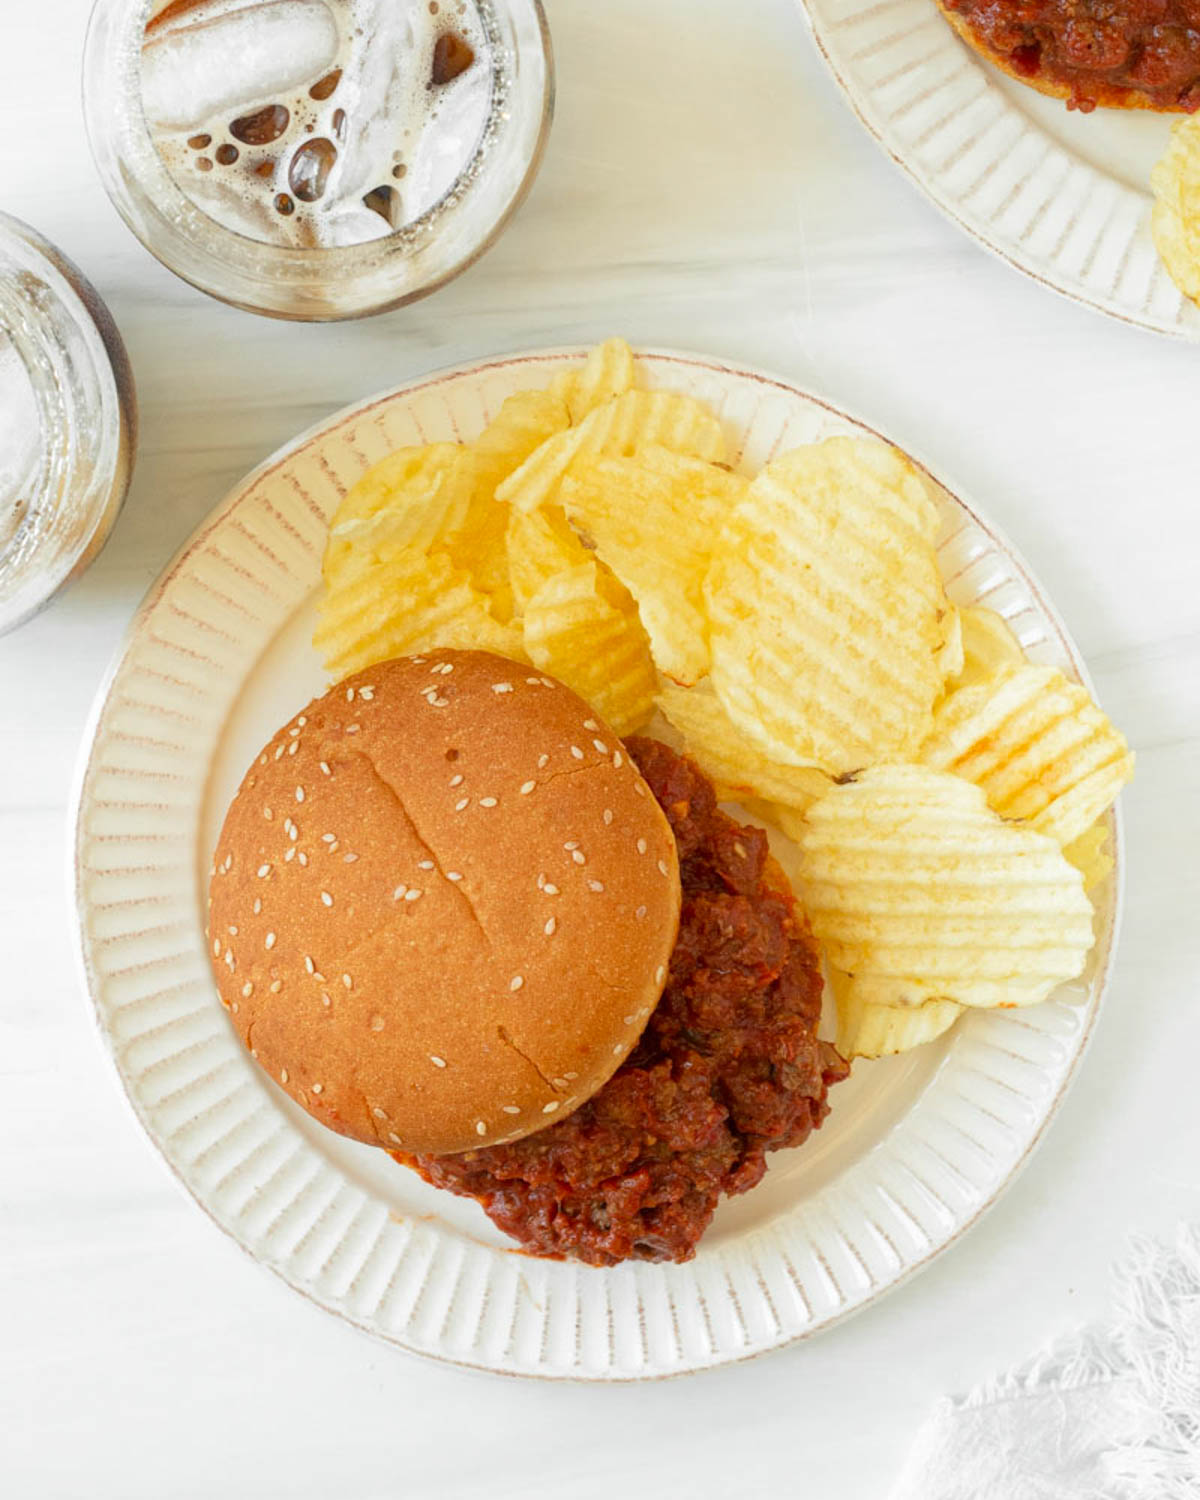 This recipe for homemade sloppy joes is an easy one-pan dinner and the perfect healthy comfort food. Made with ground beef and a rich, flavorful tomato sauce, our healthy sloppy joes are a kid-friendly meal that the adults will love too.